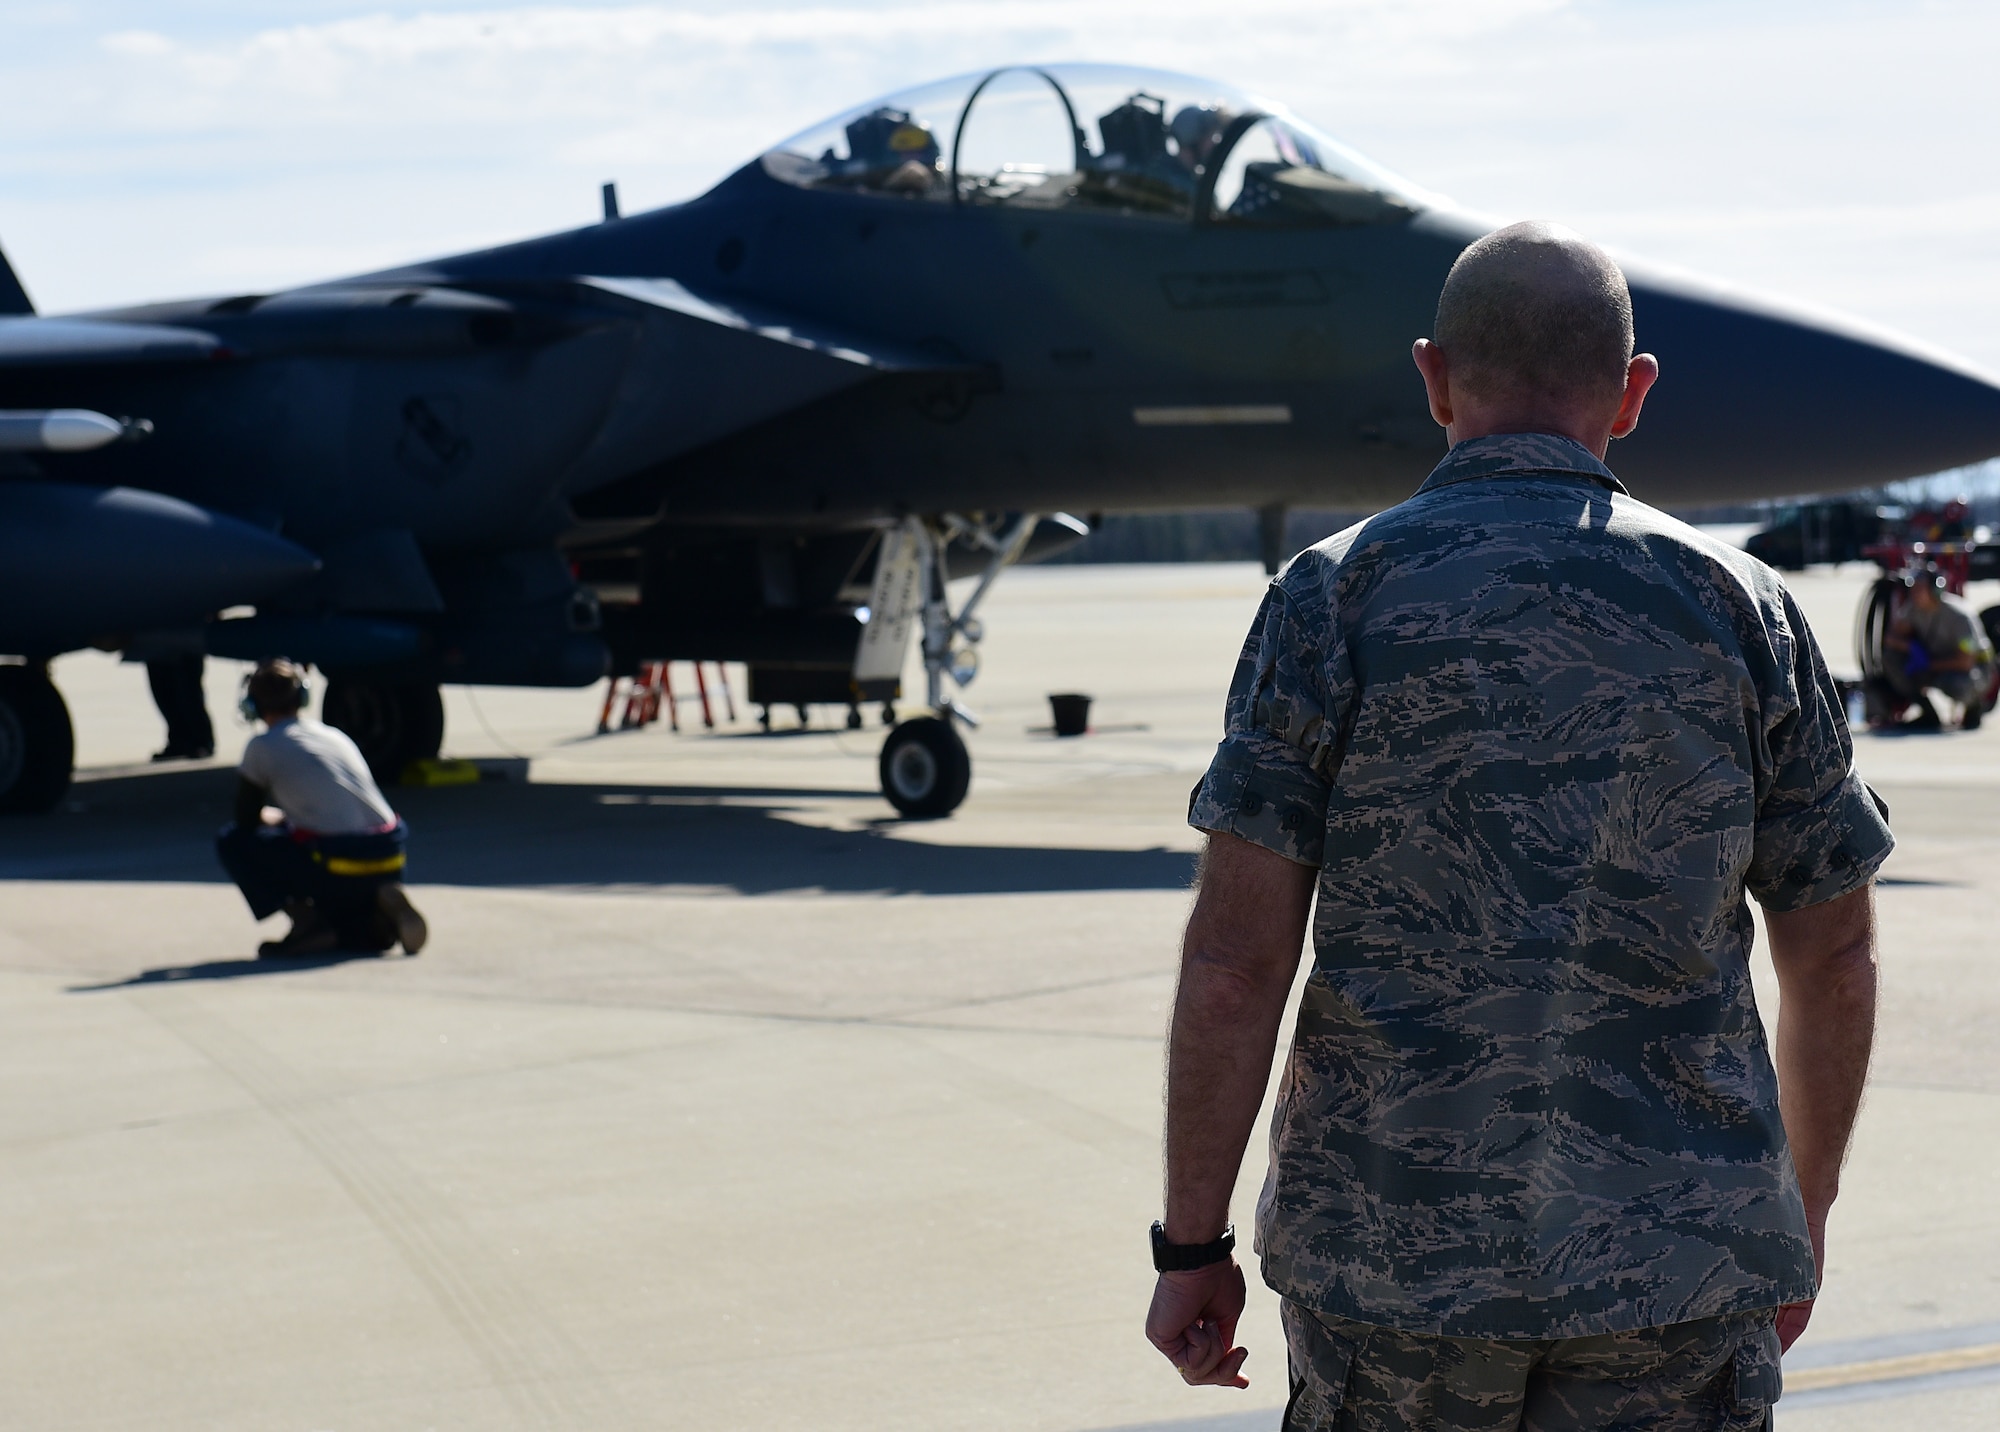 Gen. Mike Holmes, commander of Air Combat Command, watches Airmen from the 4th Aircraft Maintenance Squadron load inert weapons onto an F-15E Strike Eagle during training, Feb. 26, 2019, at Seymour Johnson Air Force Base, North Carolina. Holmes was the base commander for Seymour Johnson AFB from August 2004 until September 2006. (U.S. Air Force photo by Senior Airman Kenneth Boyton)